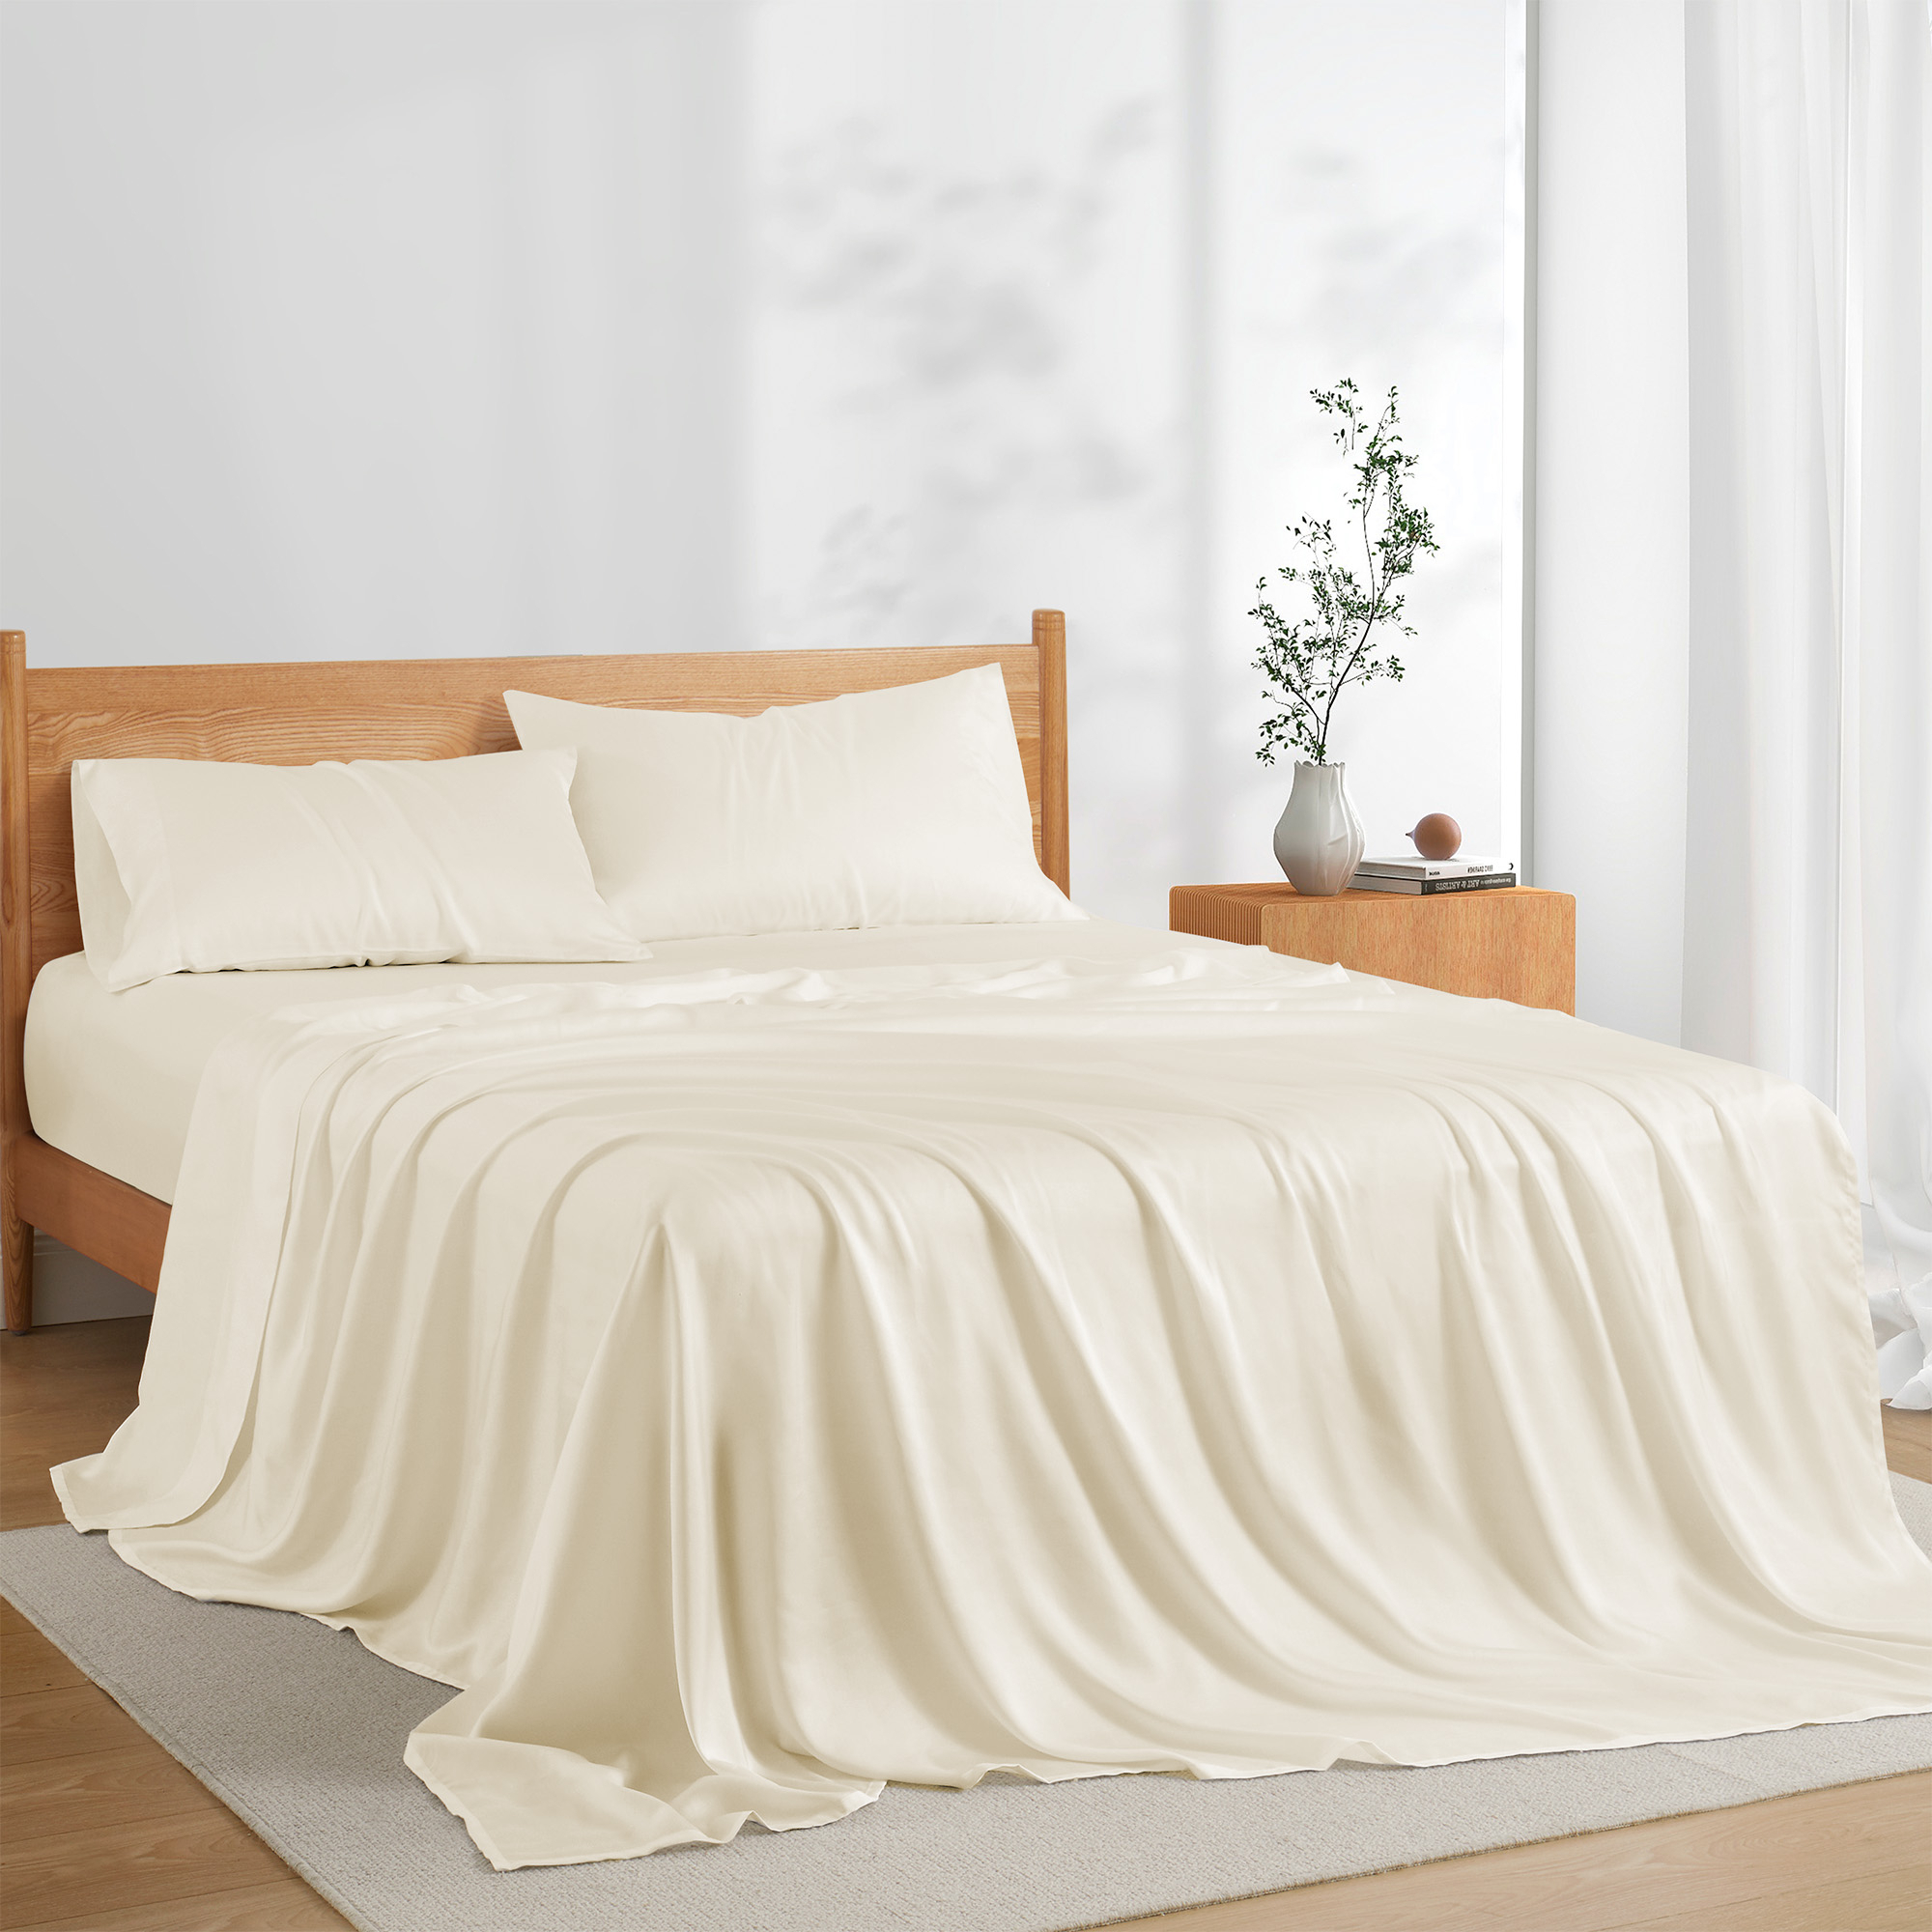 Naturally Cooling, Soft, And Breathable Tencel Lyocell 4Pc Sheets Set - Queen Size